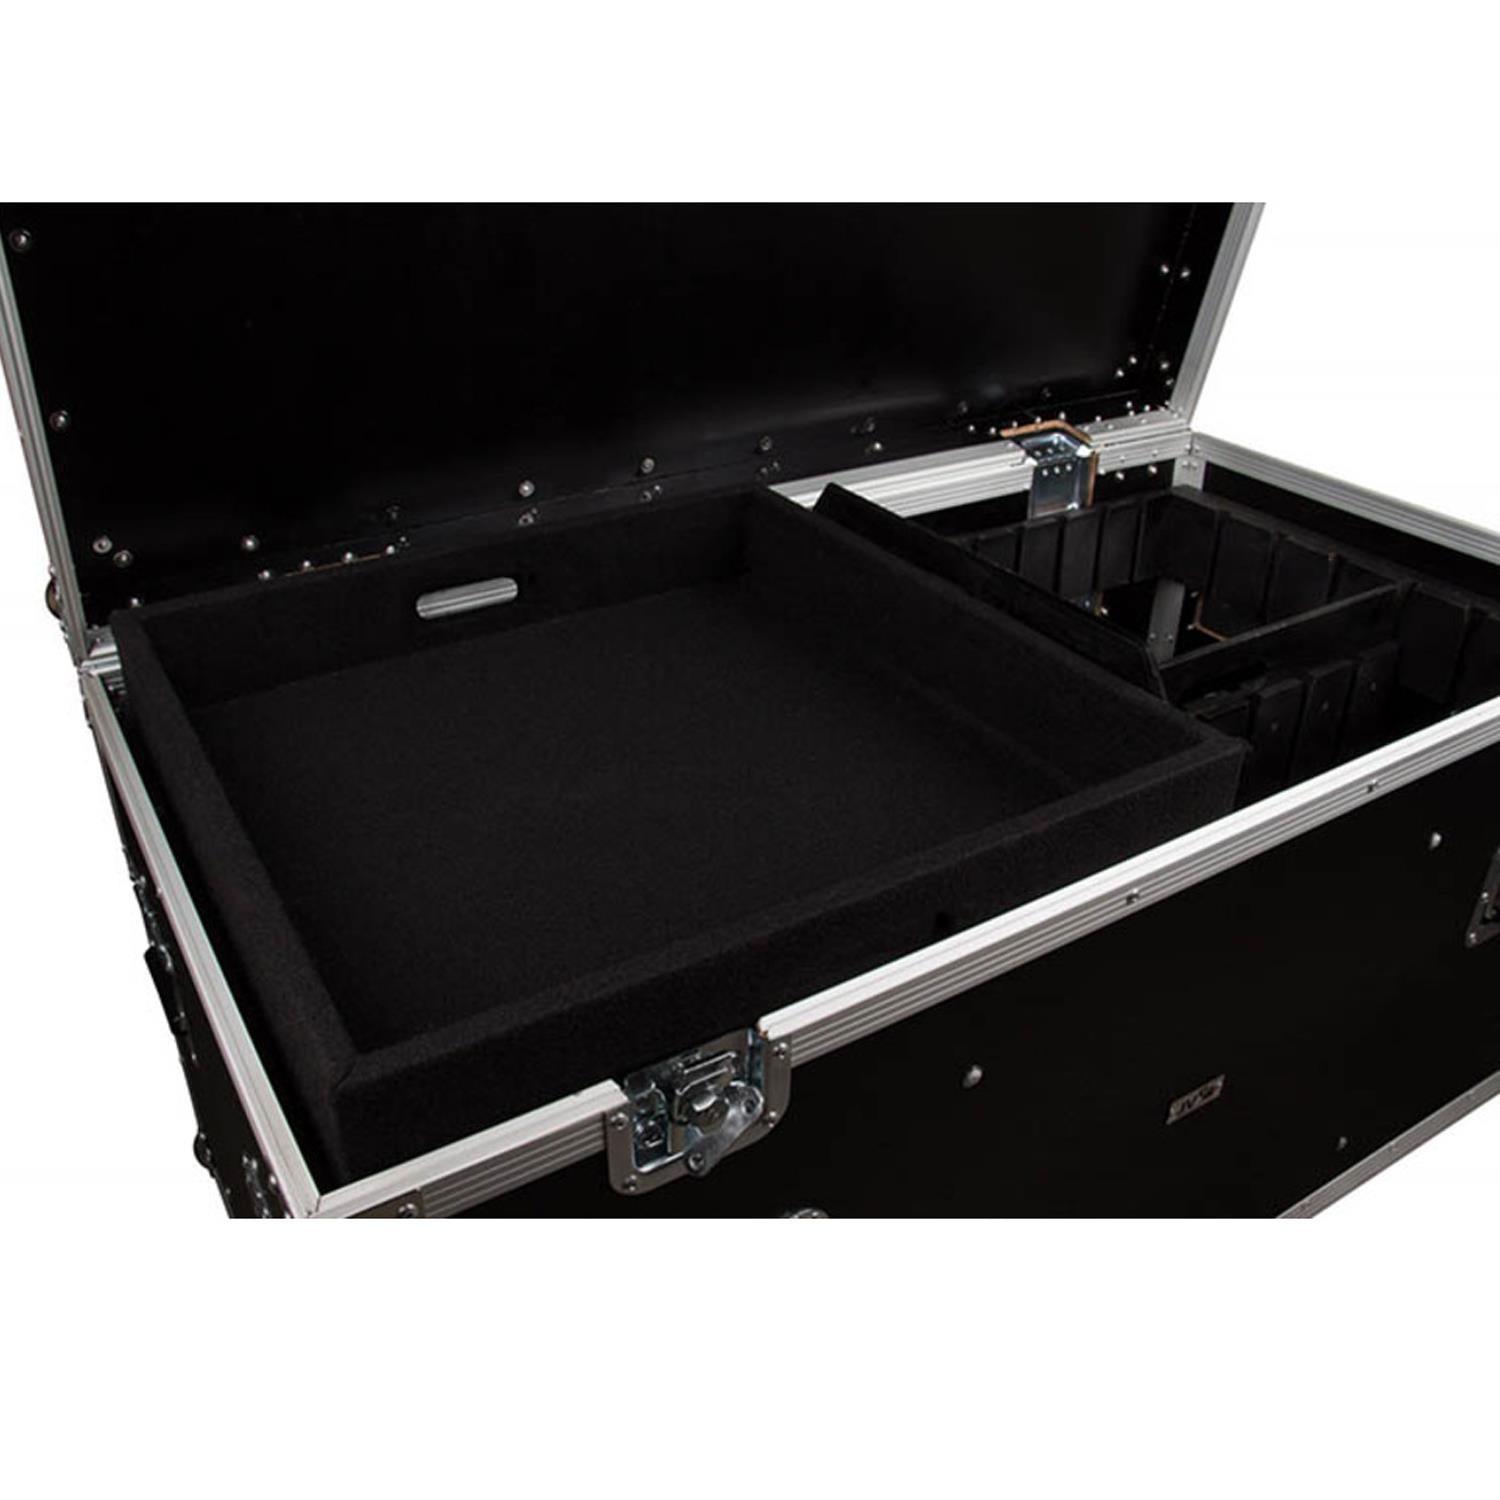 StageCore FC66 Transport case. Including 2 x Dividers & 1 x Drawer - DY Pro Audio